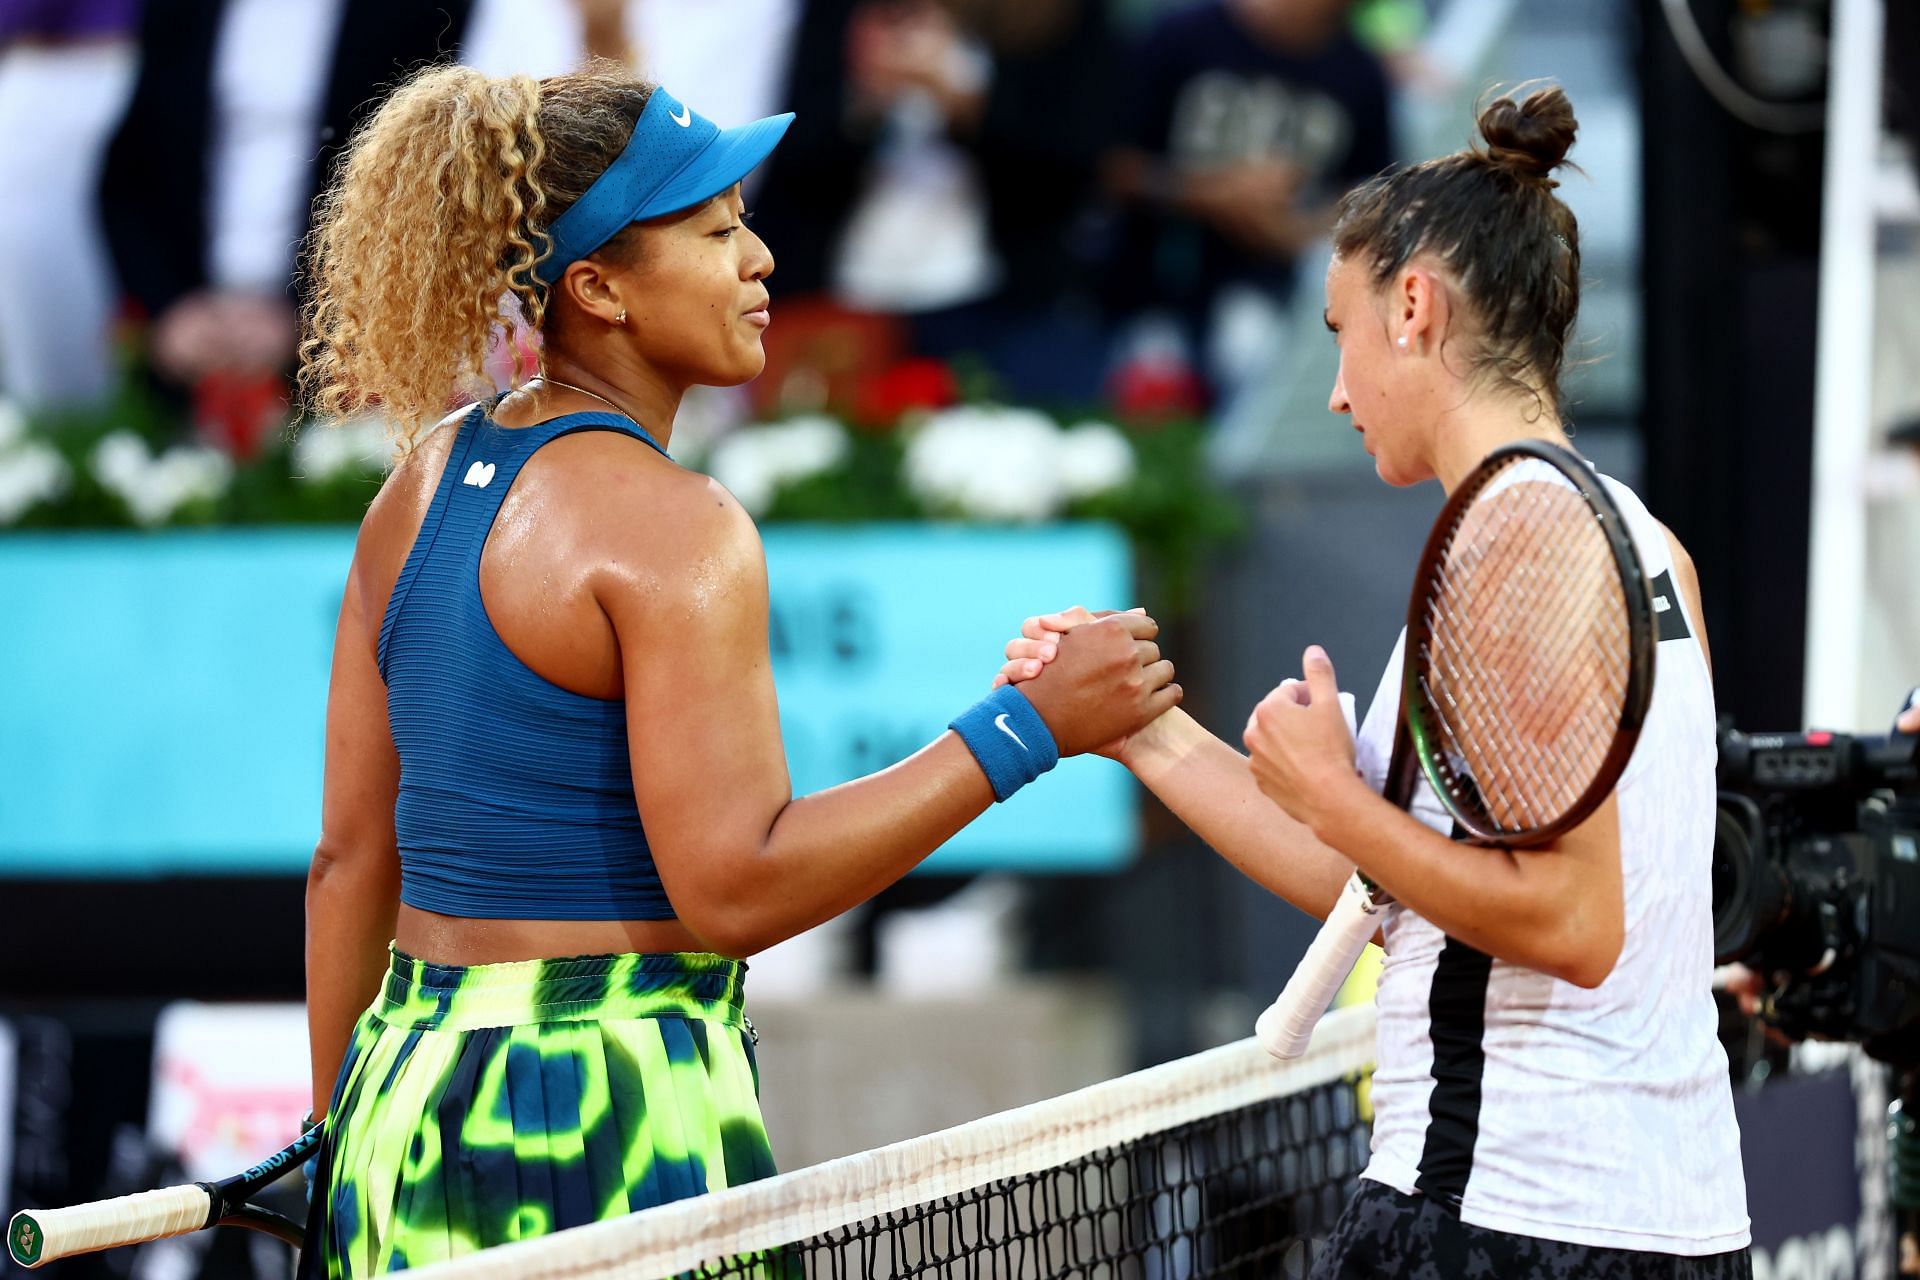 Naomi Osaka suffered from an Achilles injury in her defeat to Sara Sorribes Tormo in Madrid last week